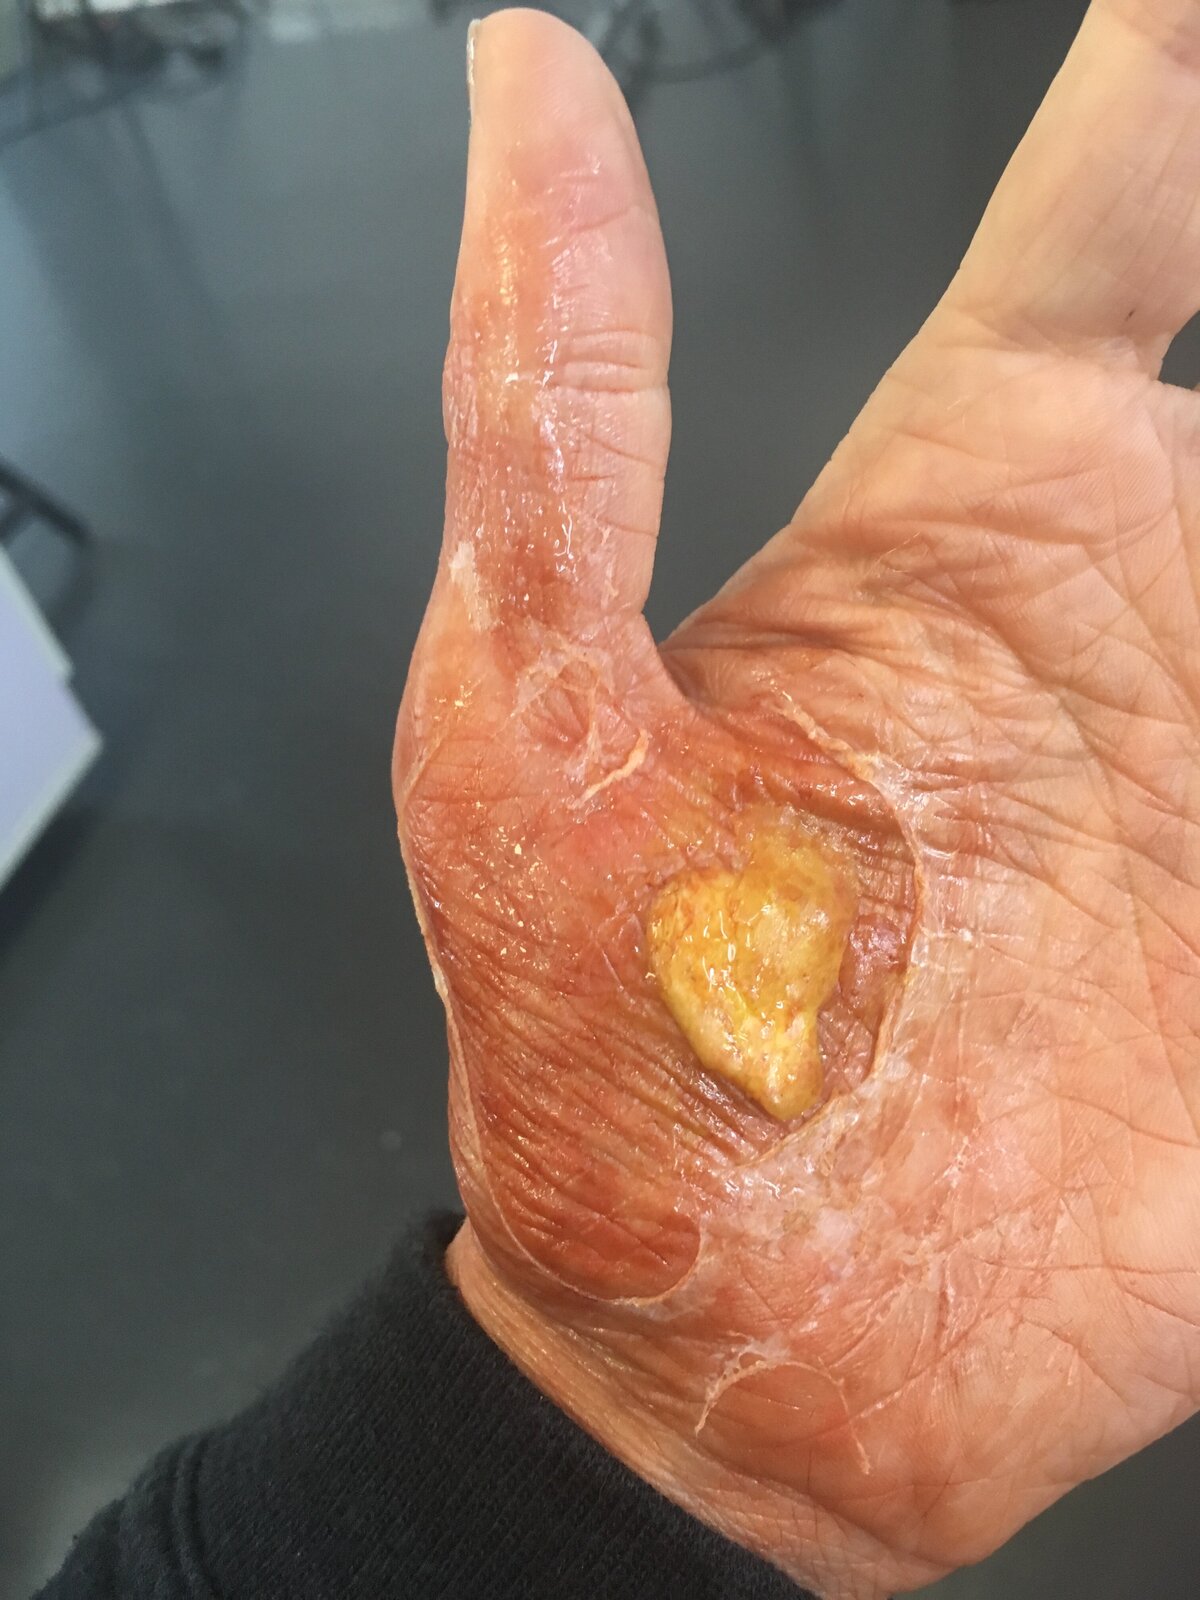 Special effects - skin infection and fungus